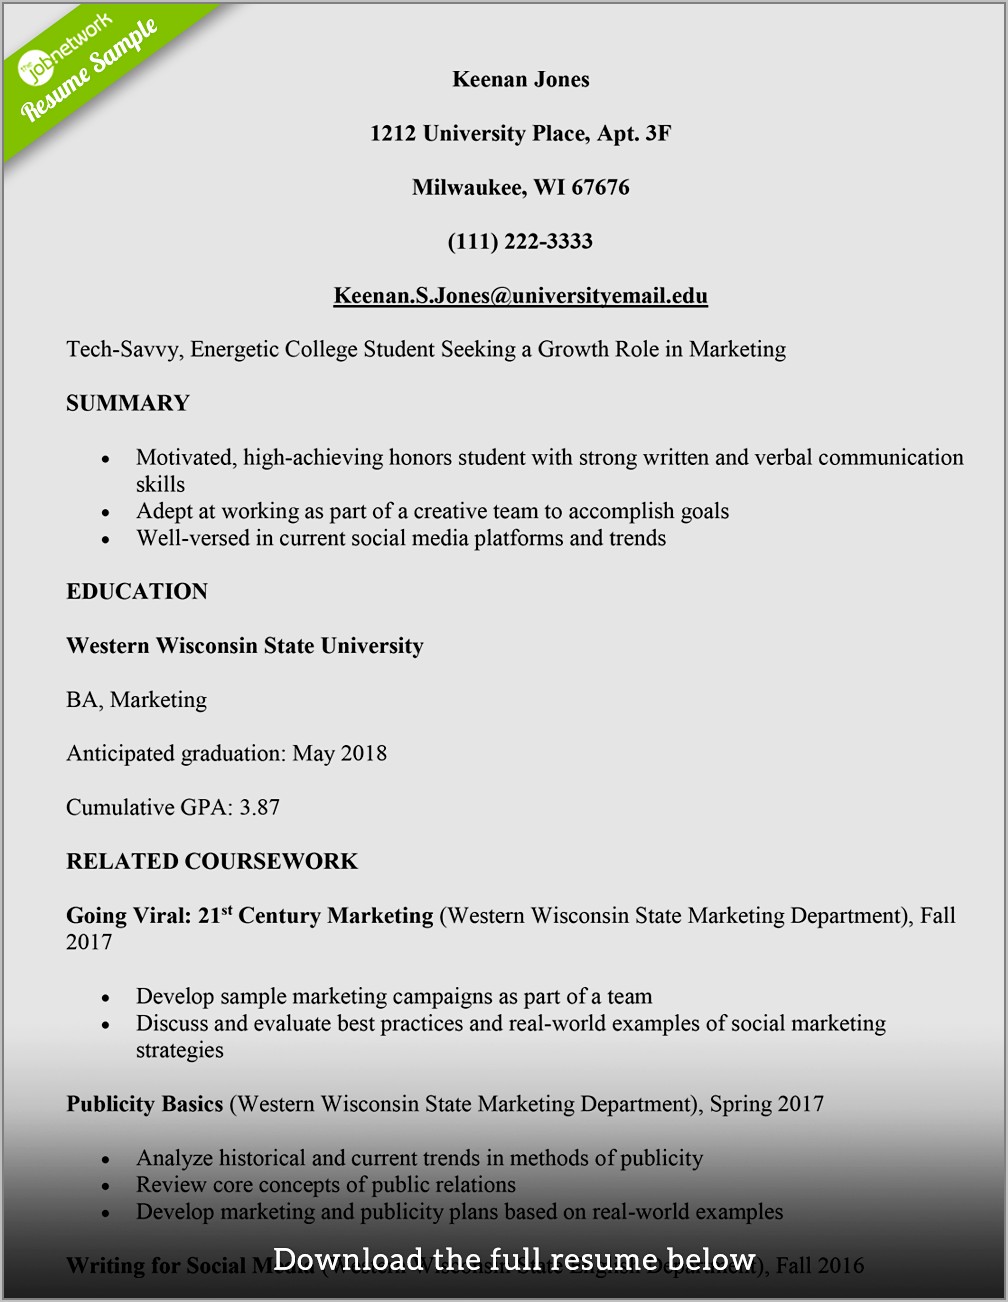 Resume Samples For Military To Civilian